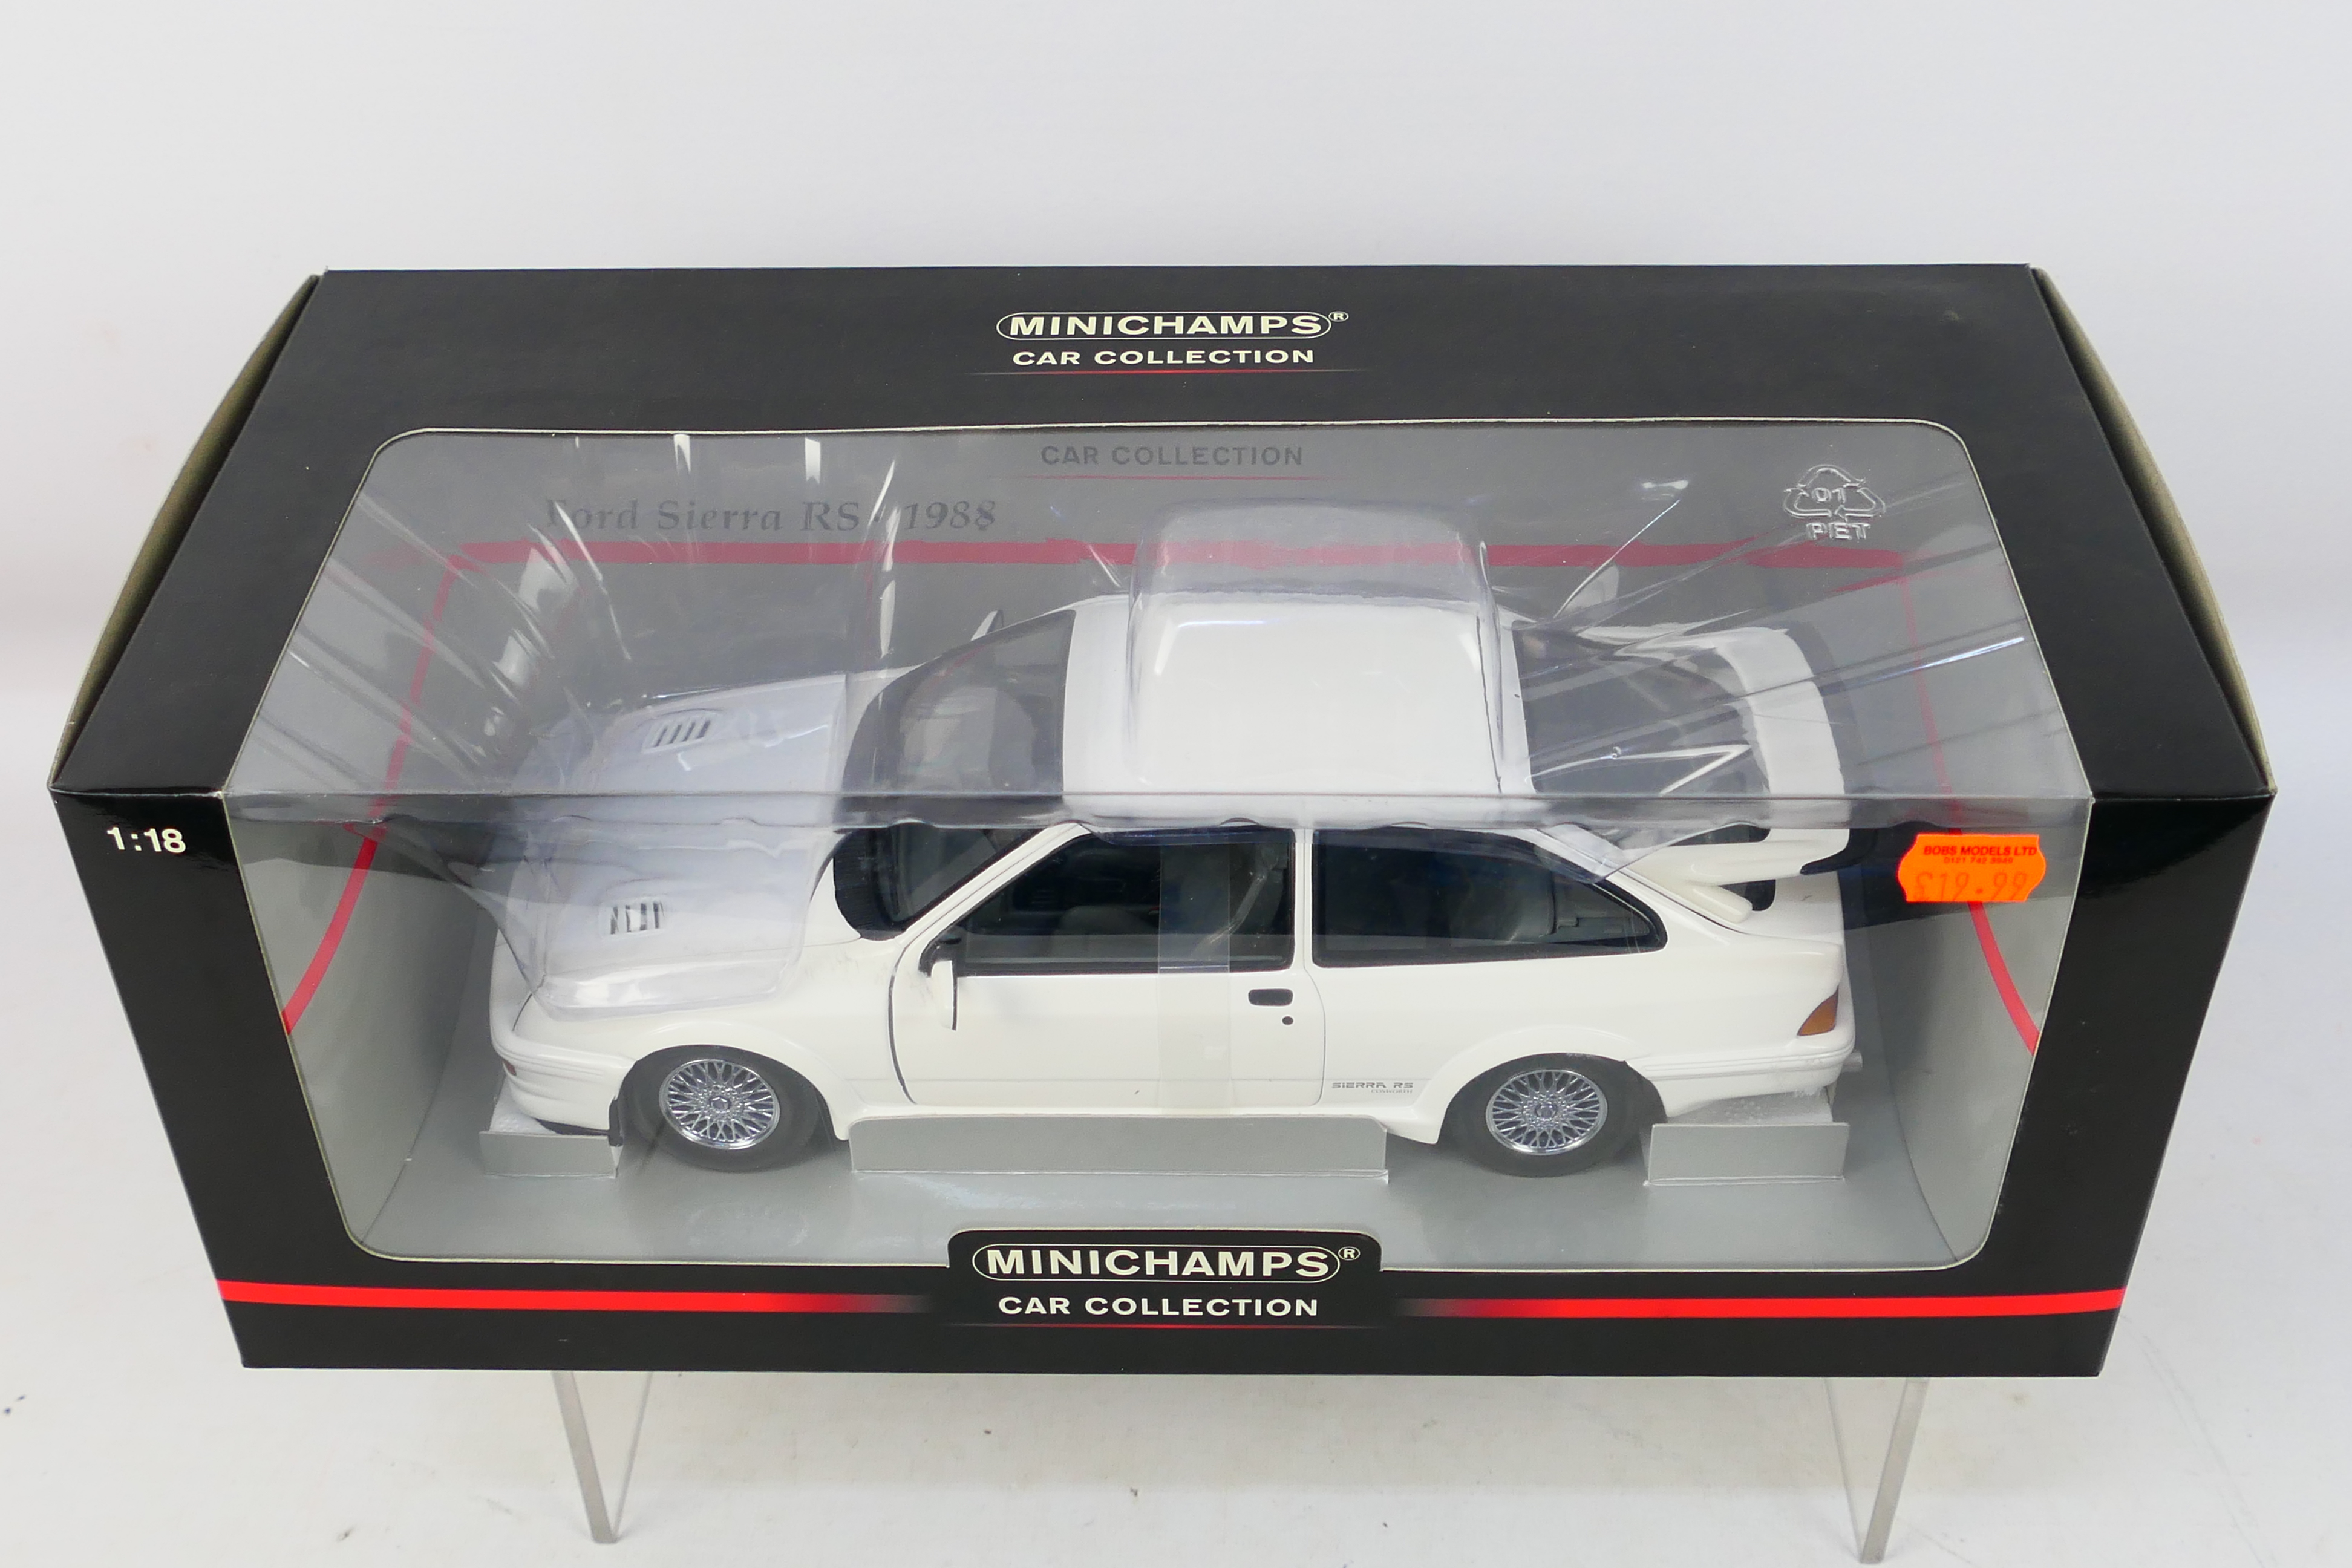 Minichamps - A boxed Minichamps #150084070 1:18 scale 1988 Ford Sierra RS Cosworth RHD. - Image 3 of 3